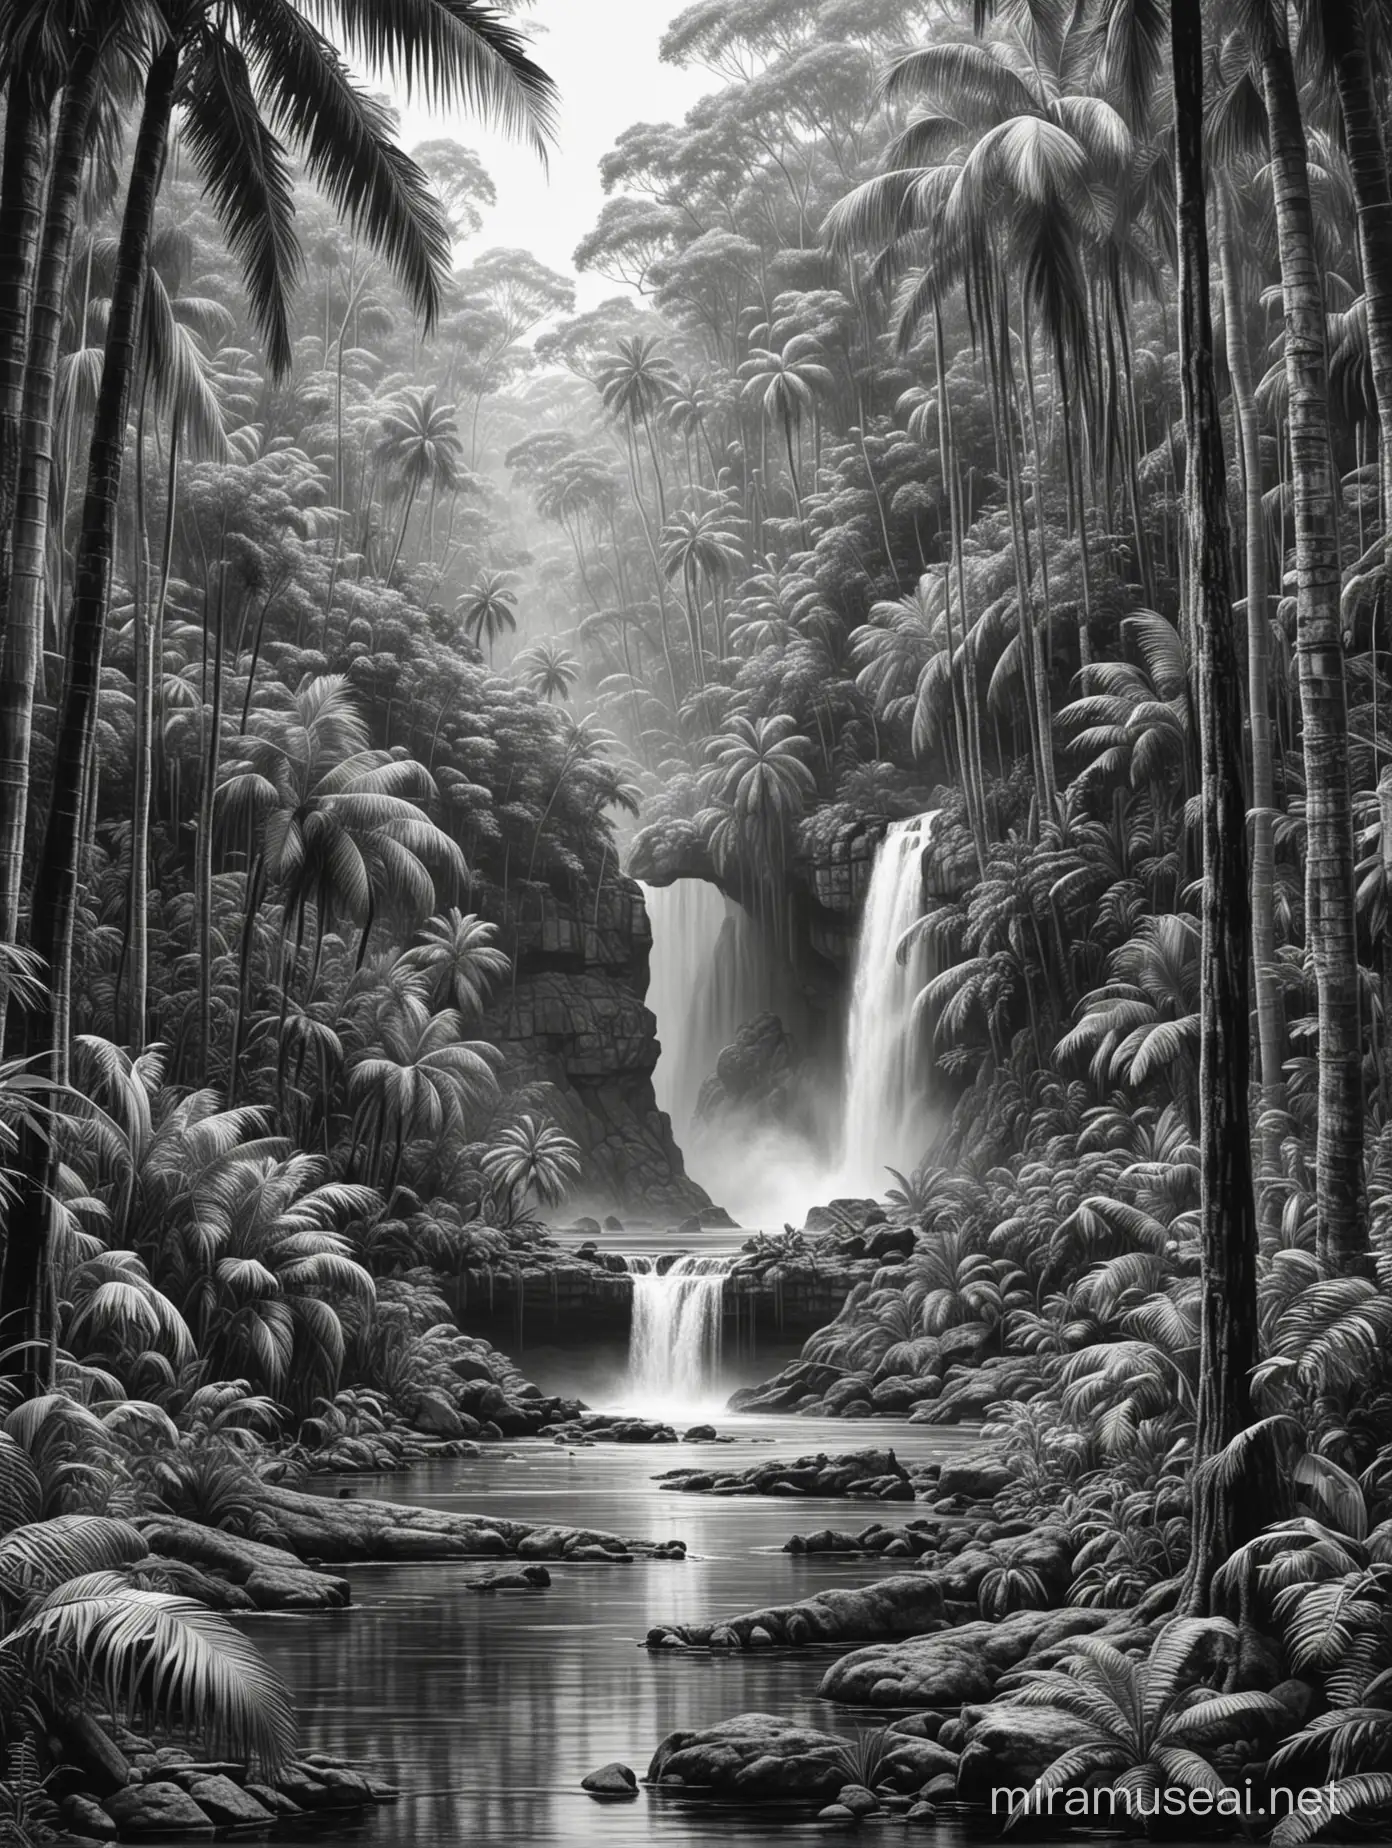 Realistic Australian Rainforest Landscape Drawing Waterfall Scene with Crocodile and Palm Trees